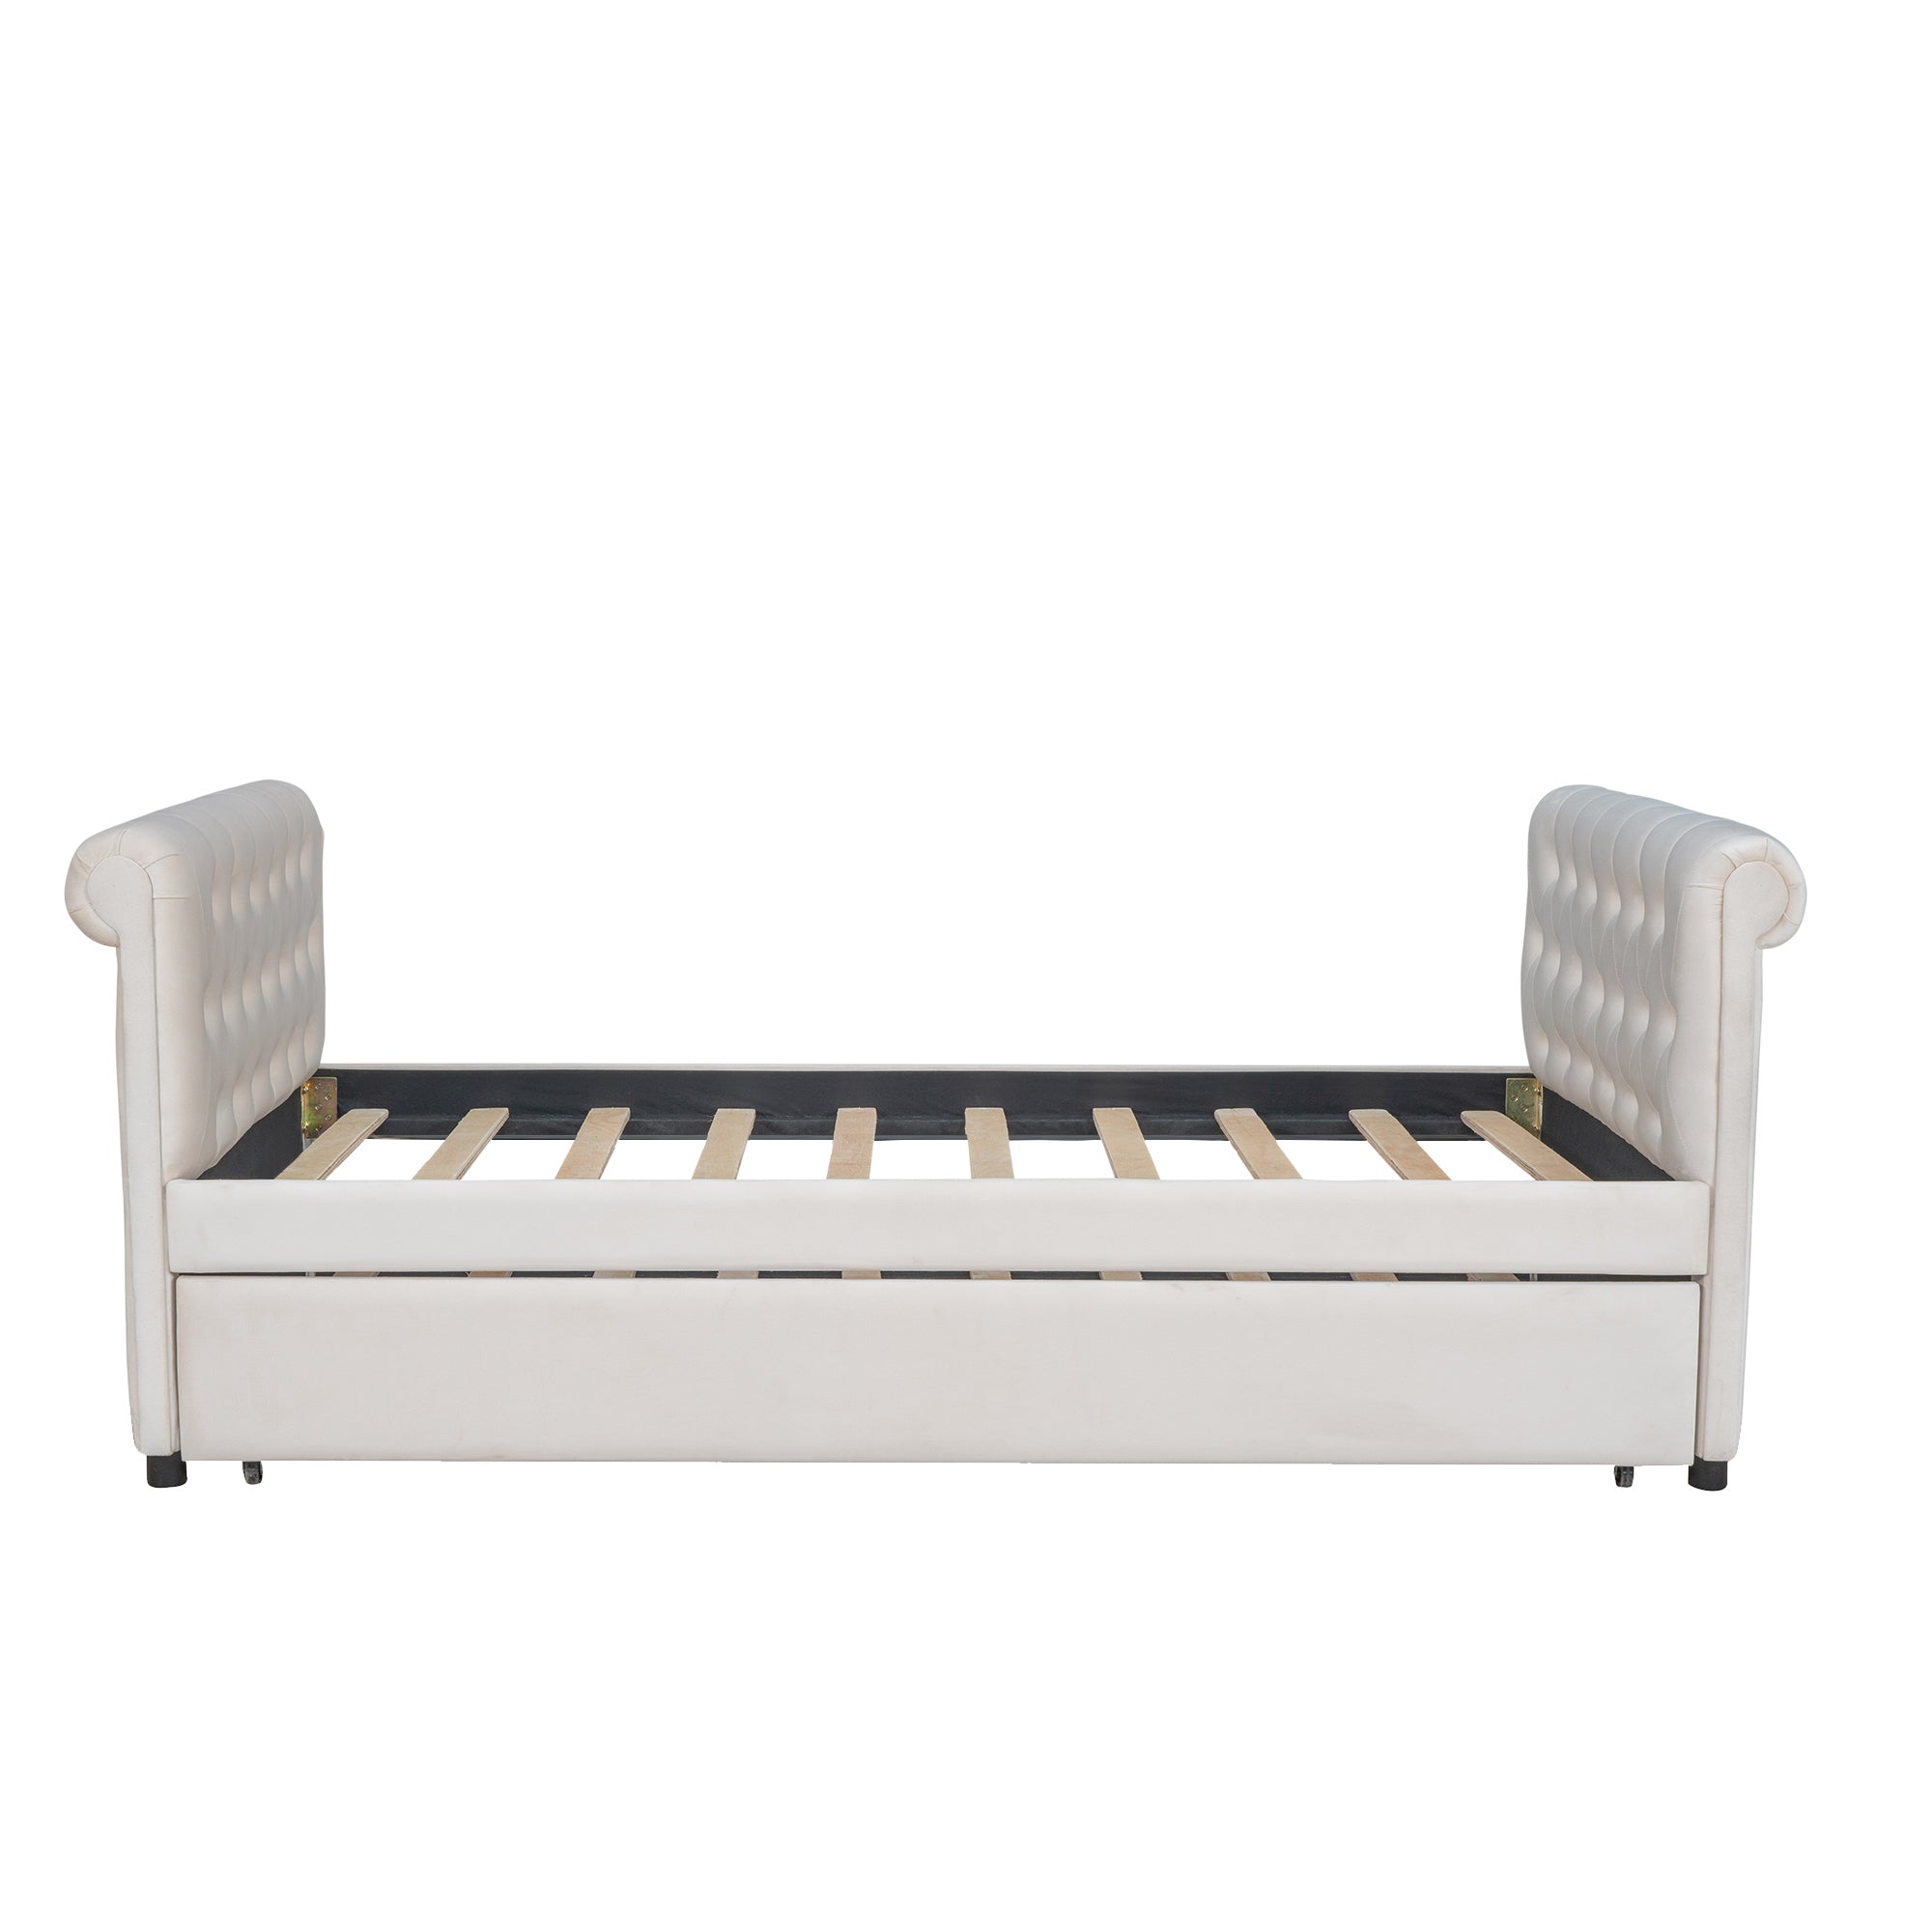 Twin Size Upholstered daybed with Trundle, Wood Slat beige-upholstered